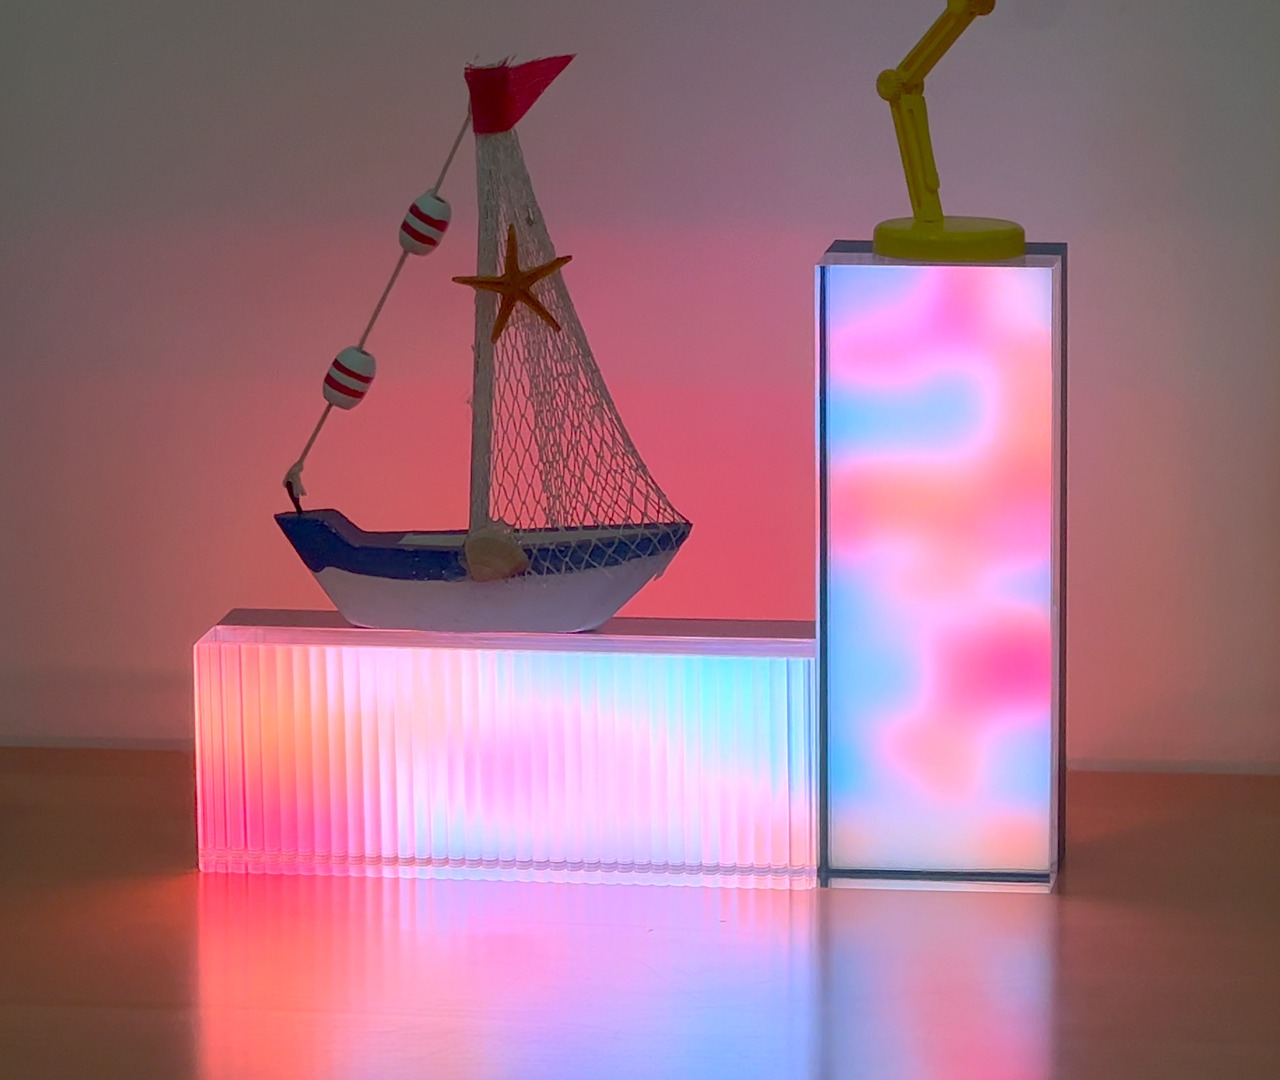 The perfect smart lamp for 2023: Moonside Neon Crystal Cube is a sleek, modular lamp with a vibrant character